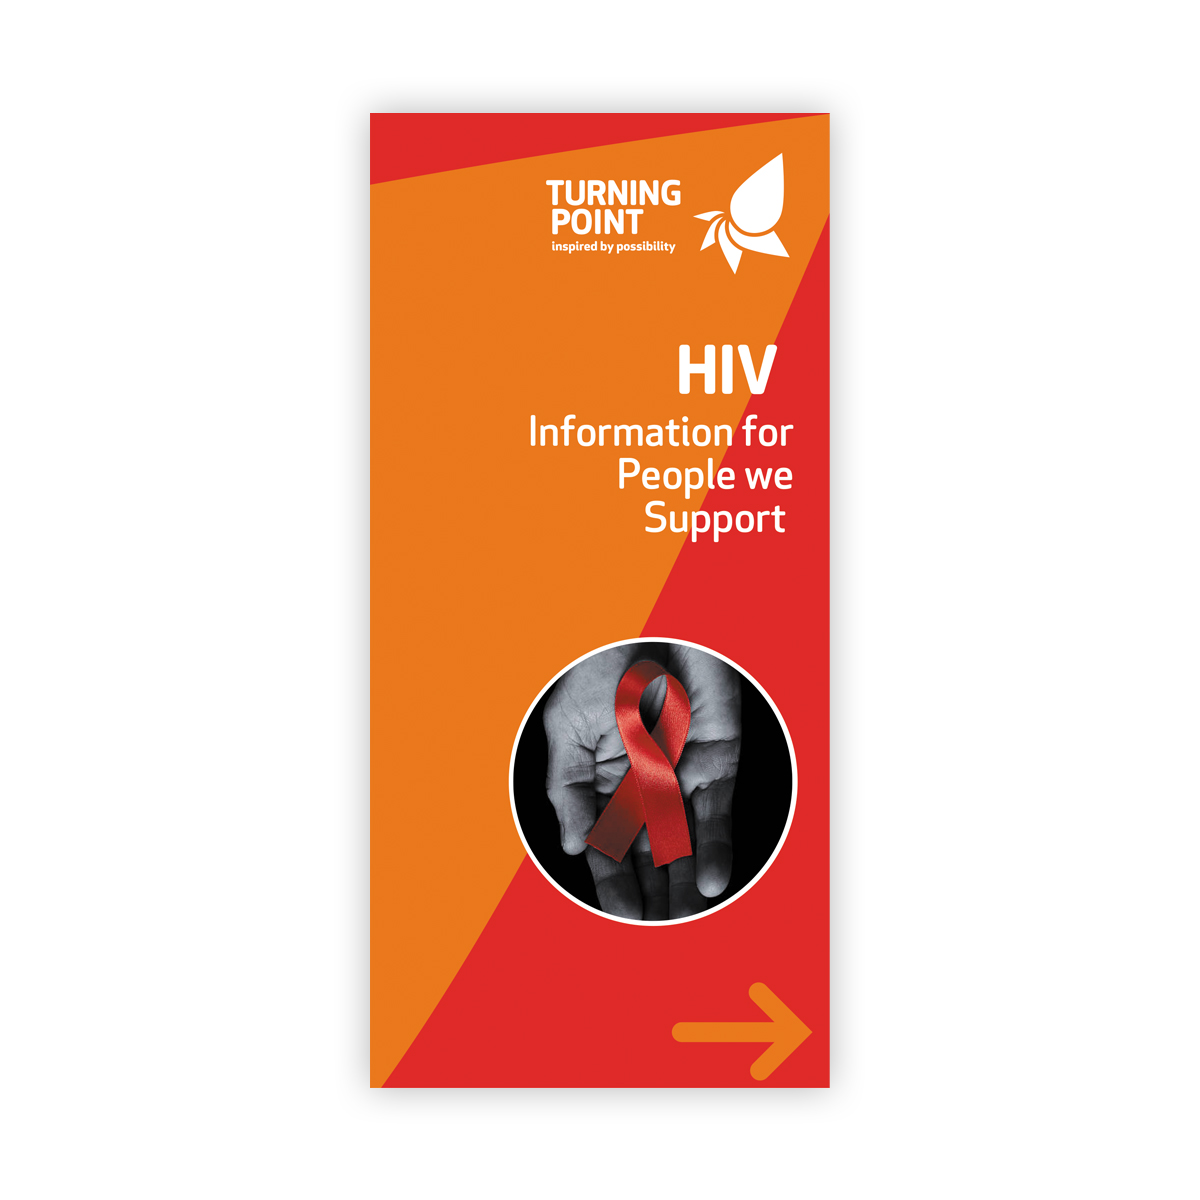 Turning Point: HIV information for people we support